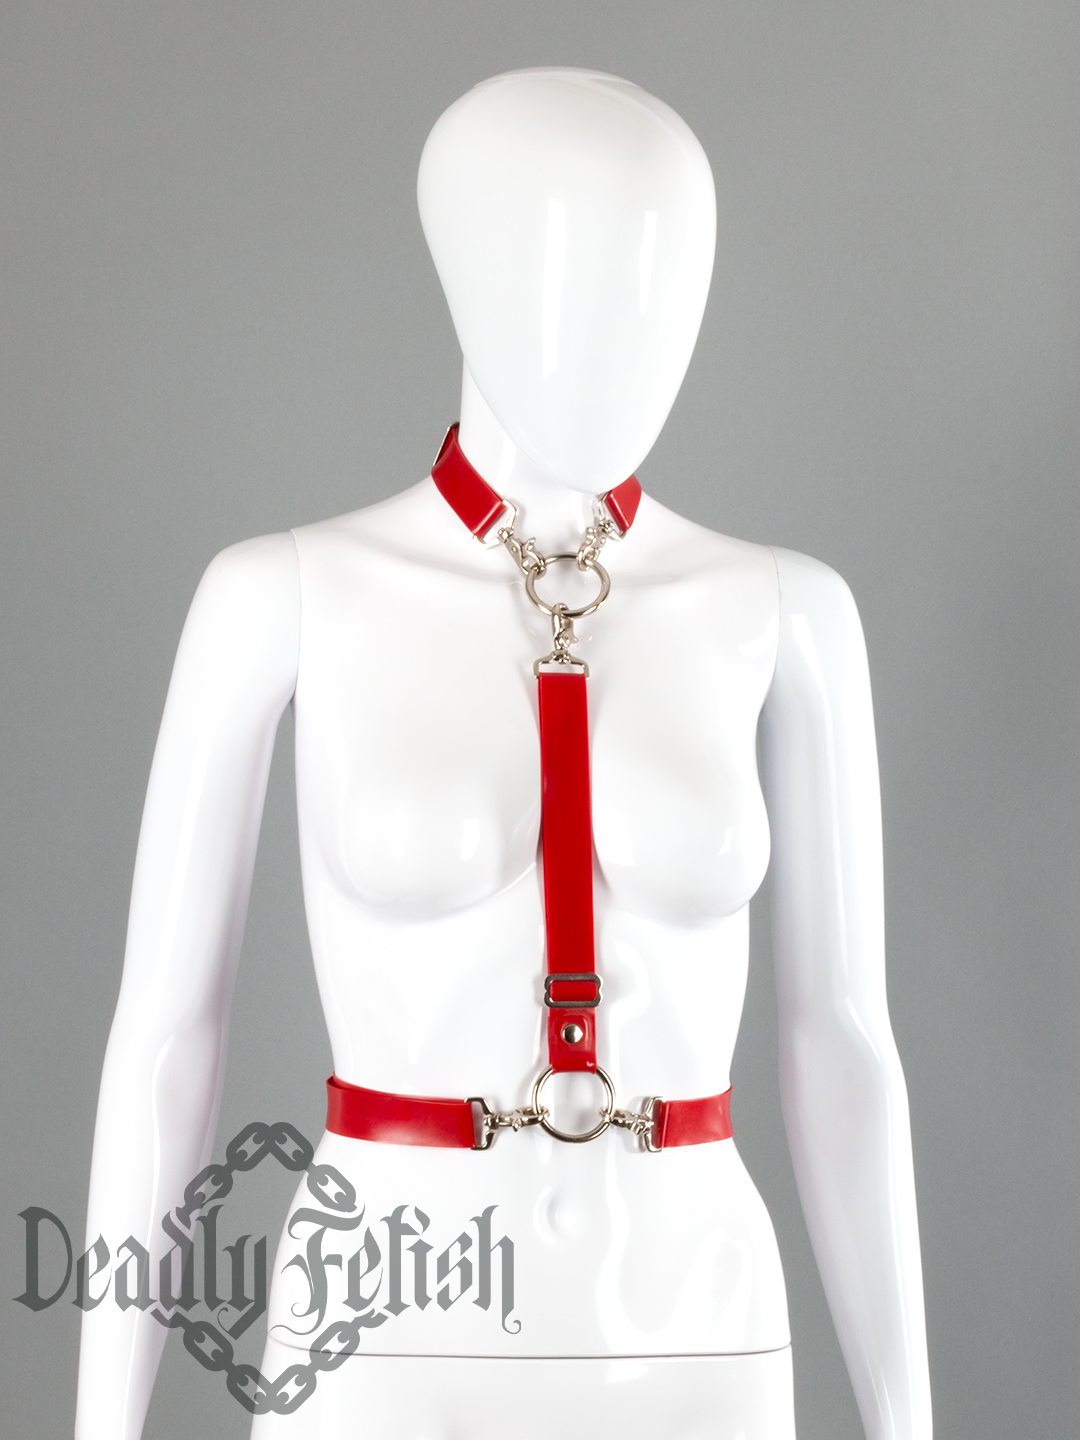 Deadly Fetish Latex: Harness #75